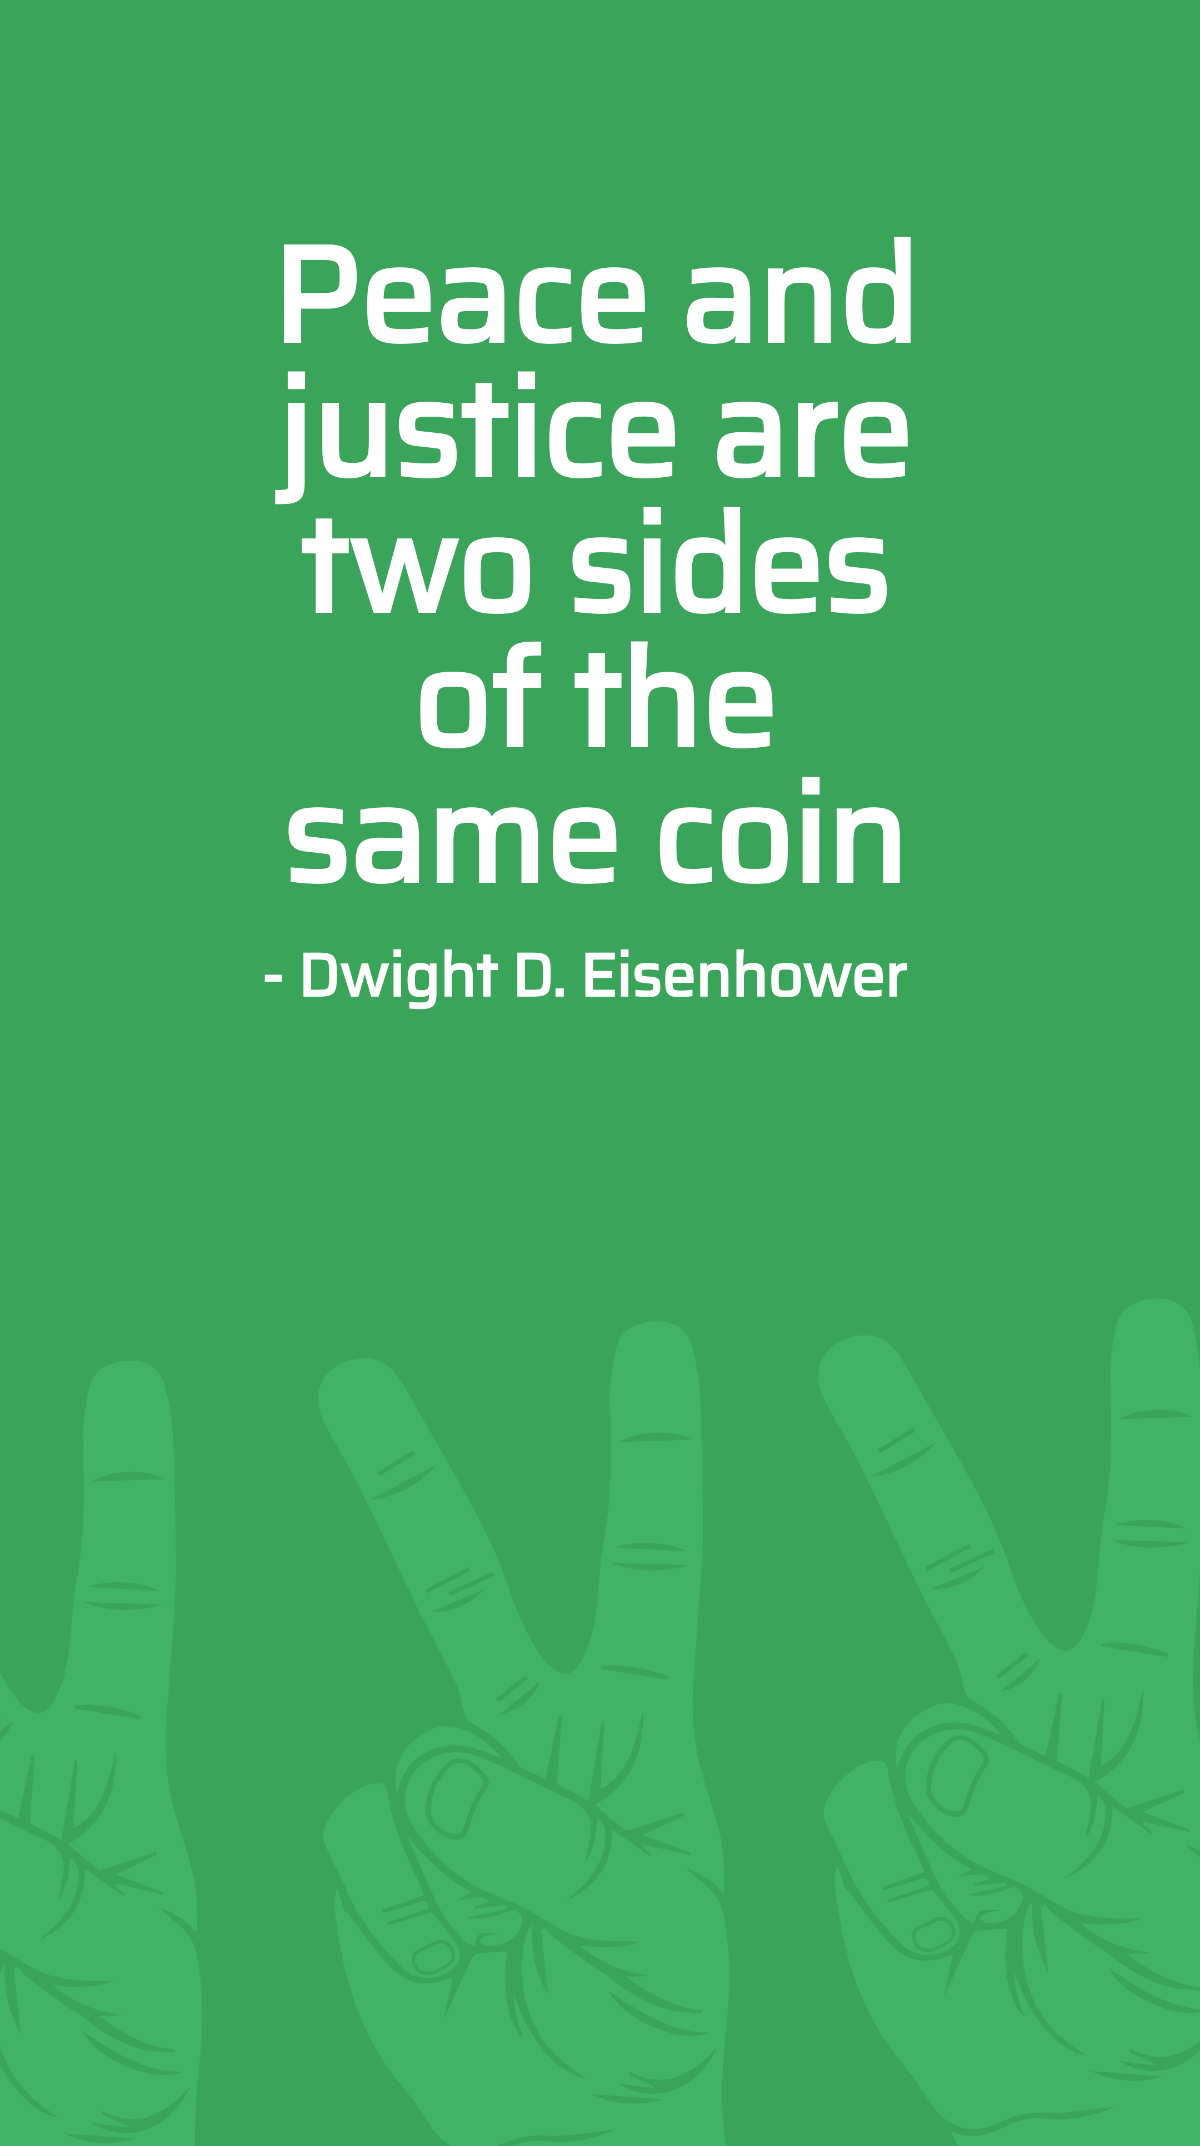 Dwight D. Eisenhower - Peace and justice are two sides of the same coin Template